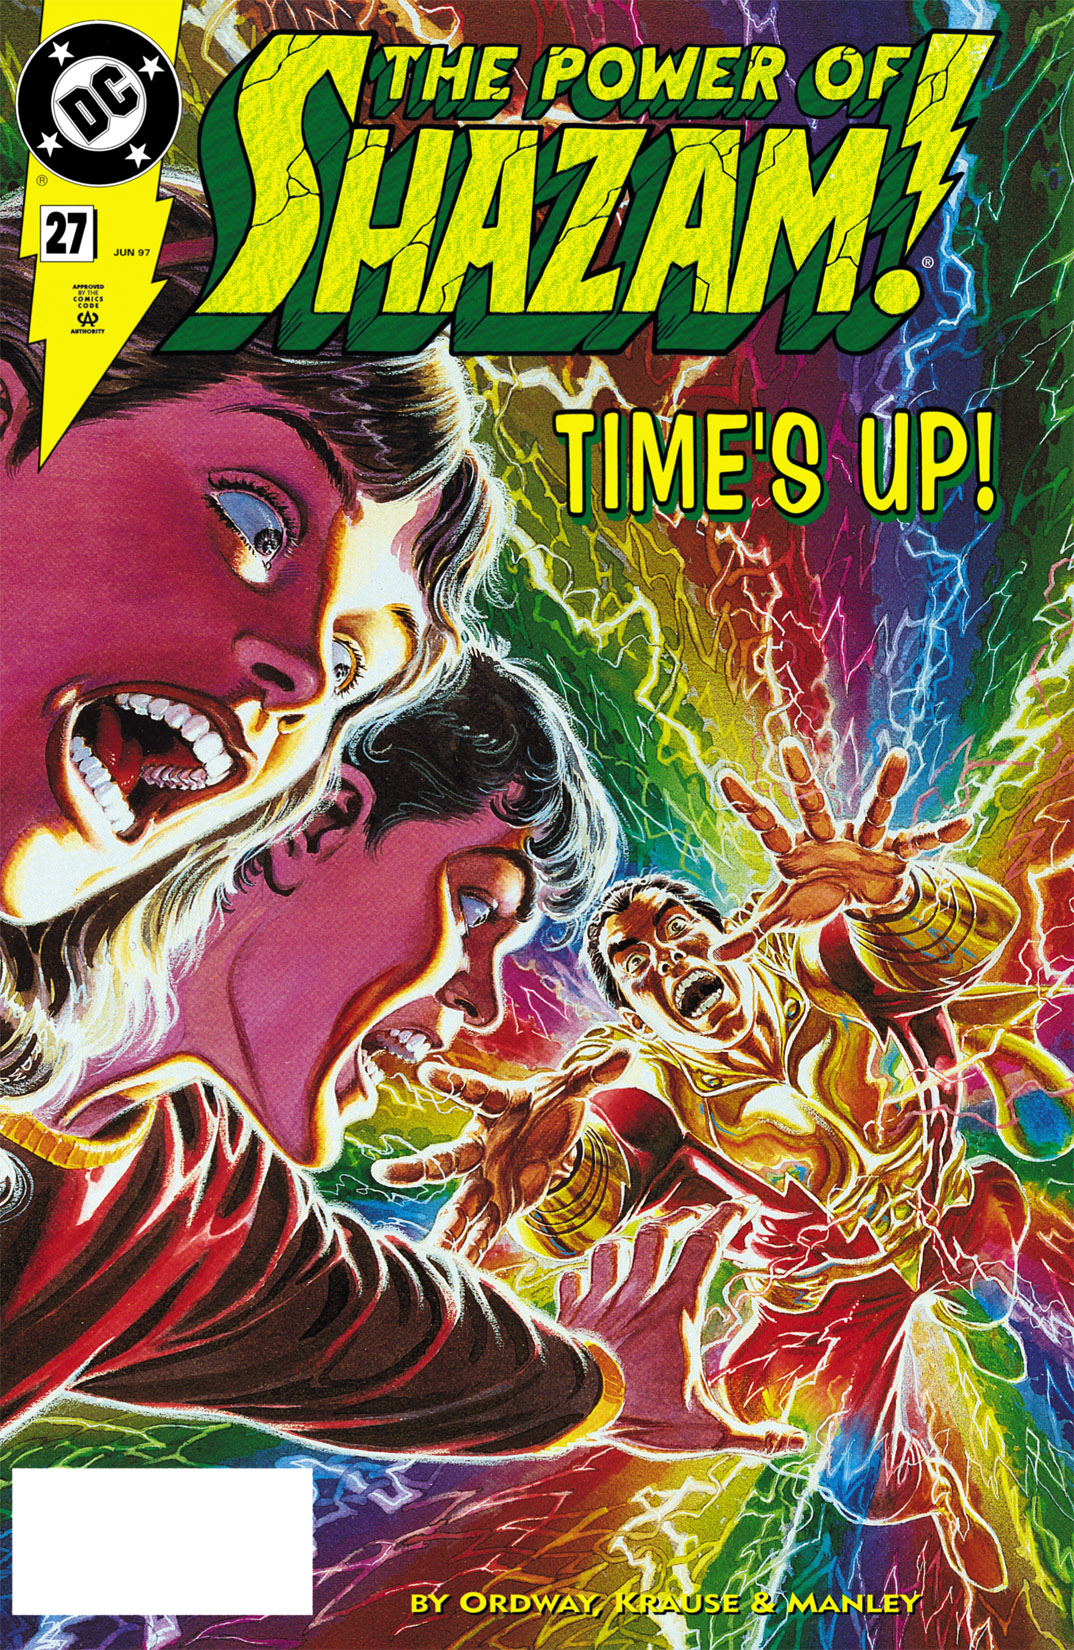 Read online The Power of SHAZAM! comic -  Issue #27 - 1